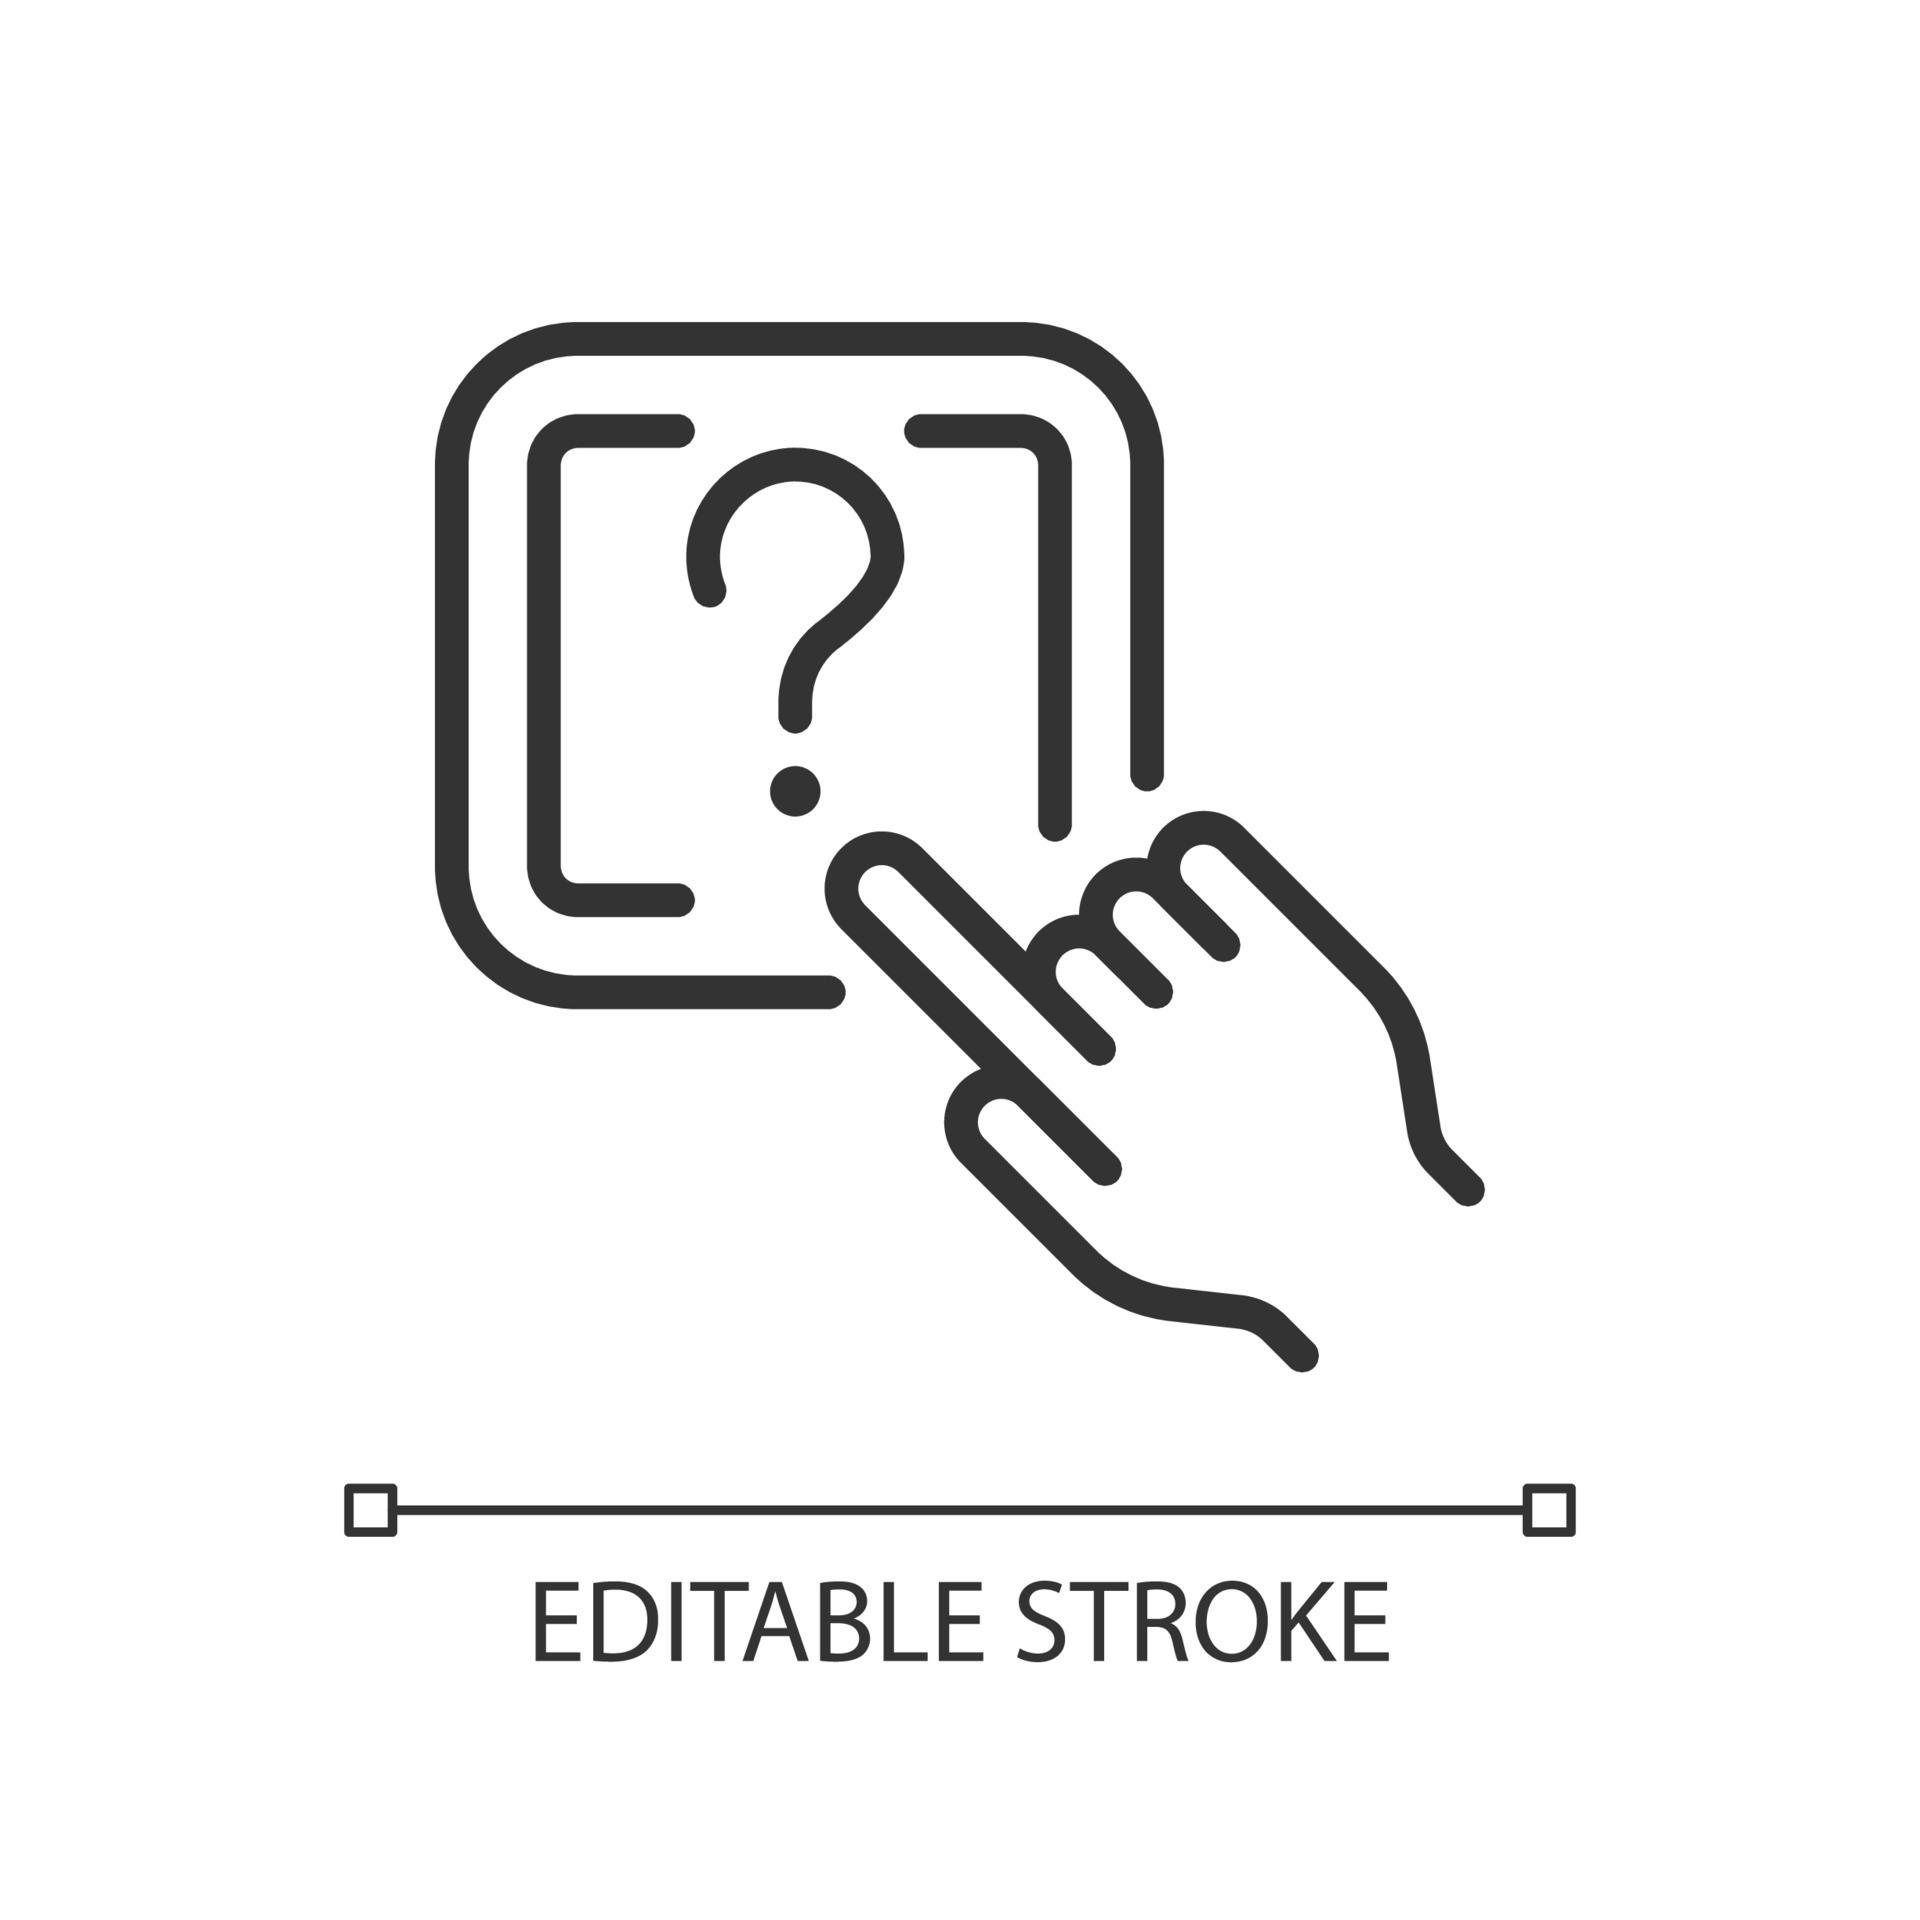 https://static.vecteezy.com/system/resources/previews/007/948/154/original/question-button-linear-icon-request-to-technical-support-looking-of-problem-solving-thin-line-illustration-contour-symbol-outline-drawing-editable-stroke-vector.jpg